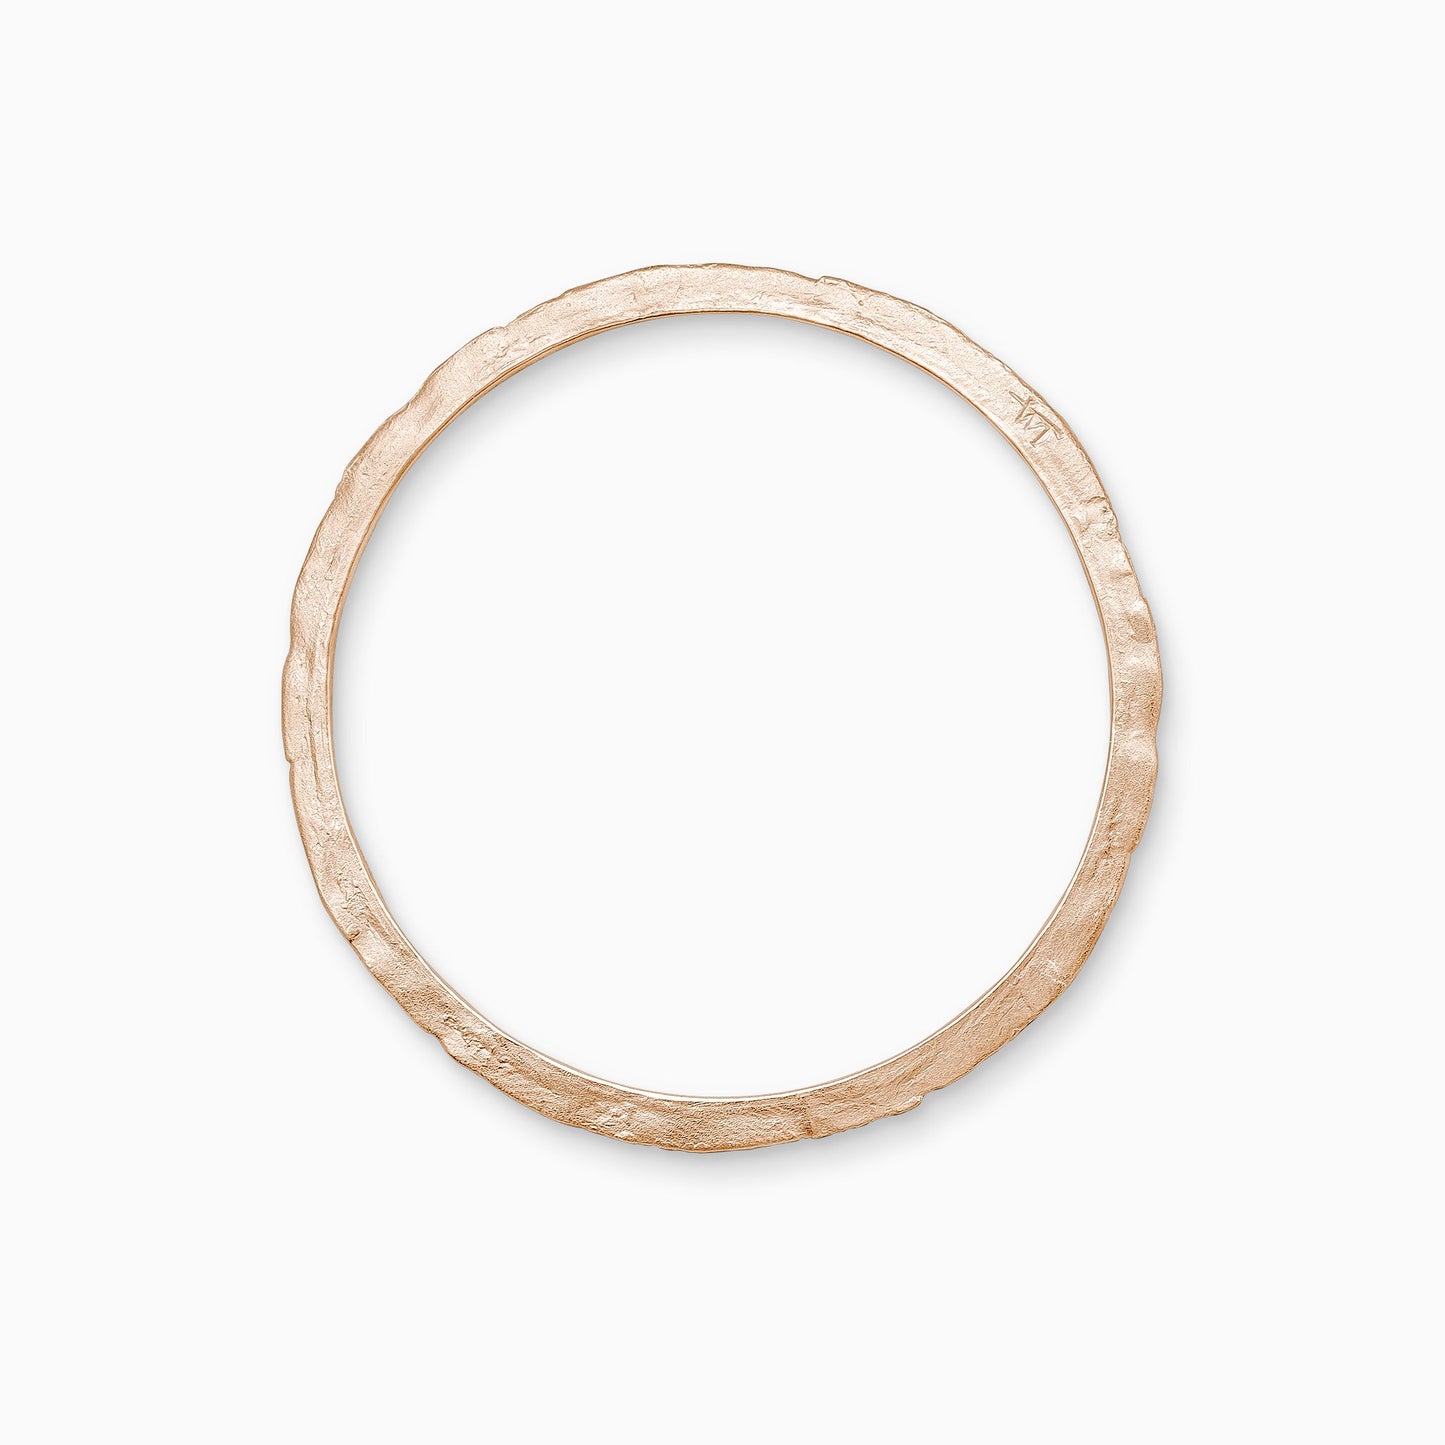 An 18ct Fairtrade rose gold bangle, textured and flat with smooth inside edge and contoured outer edge. Inside diameter 63mm. Outside diameter 72mm.